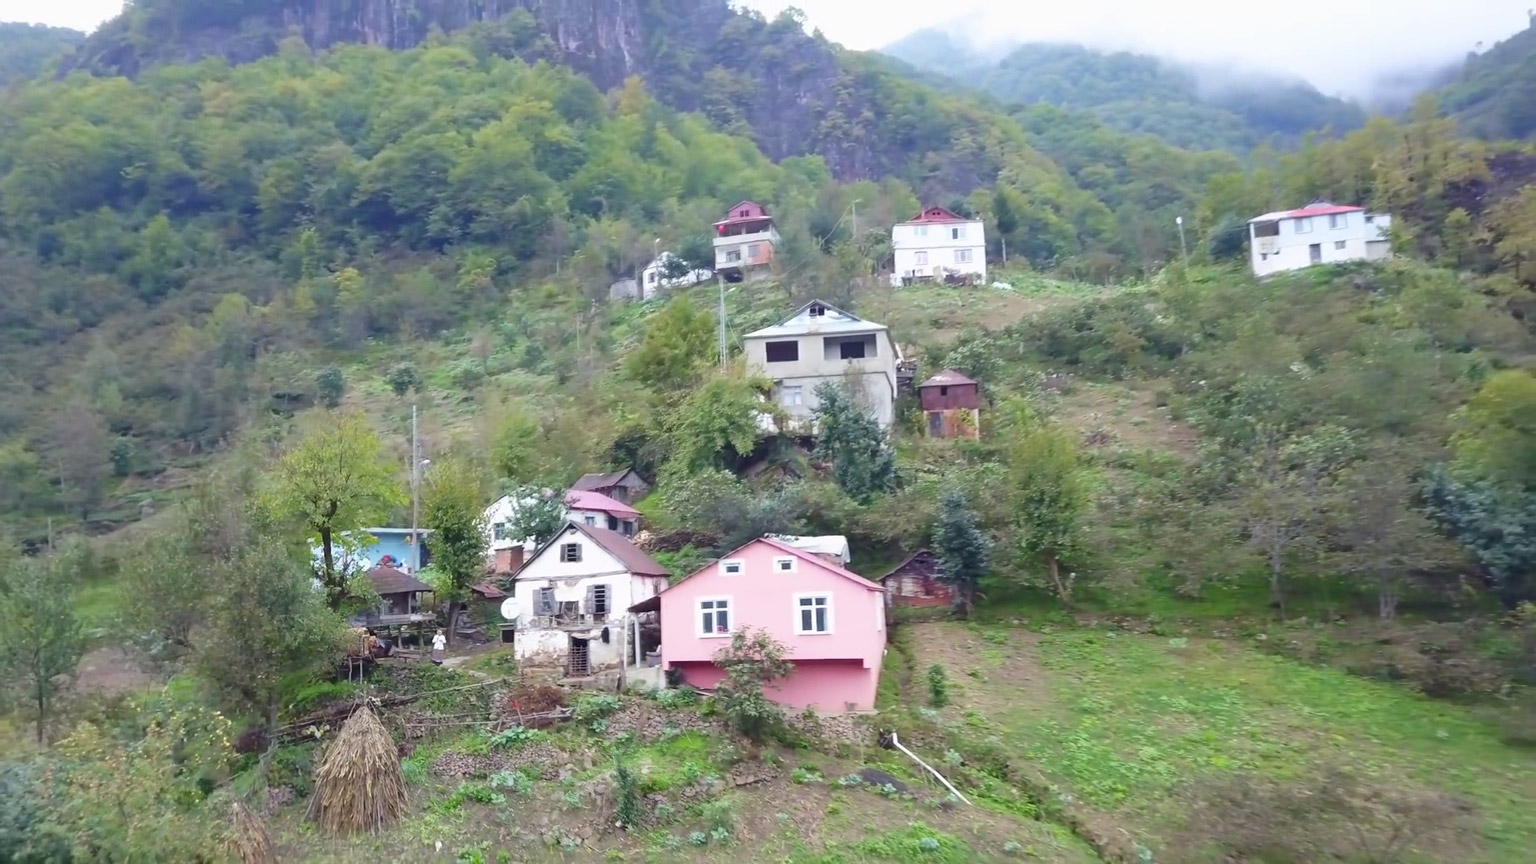 houses from the whistled language video project